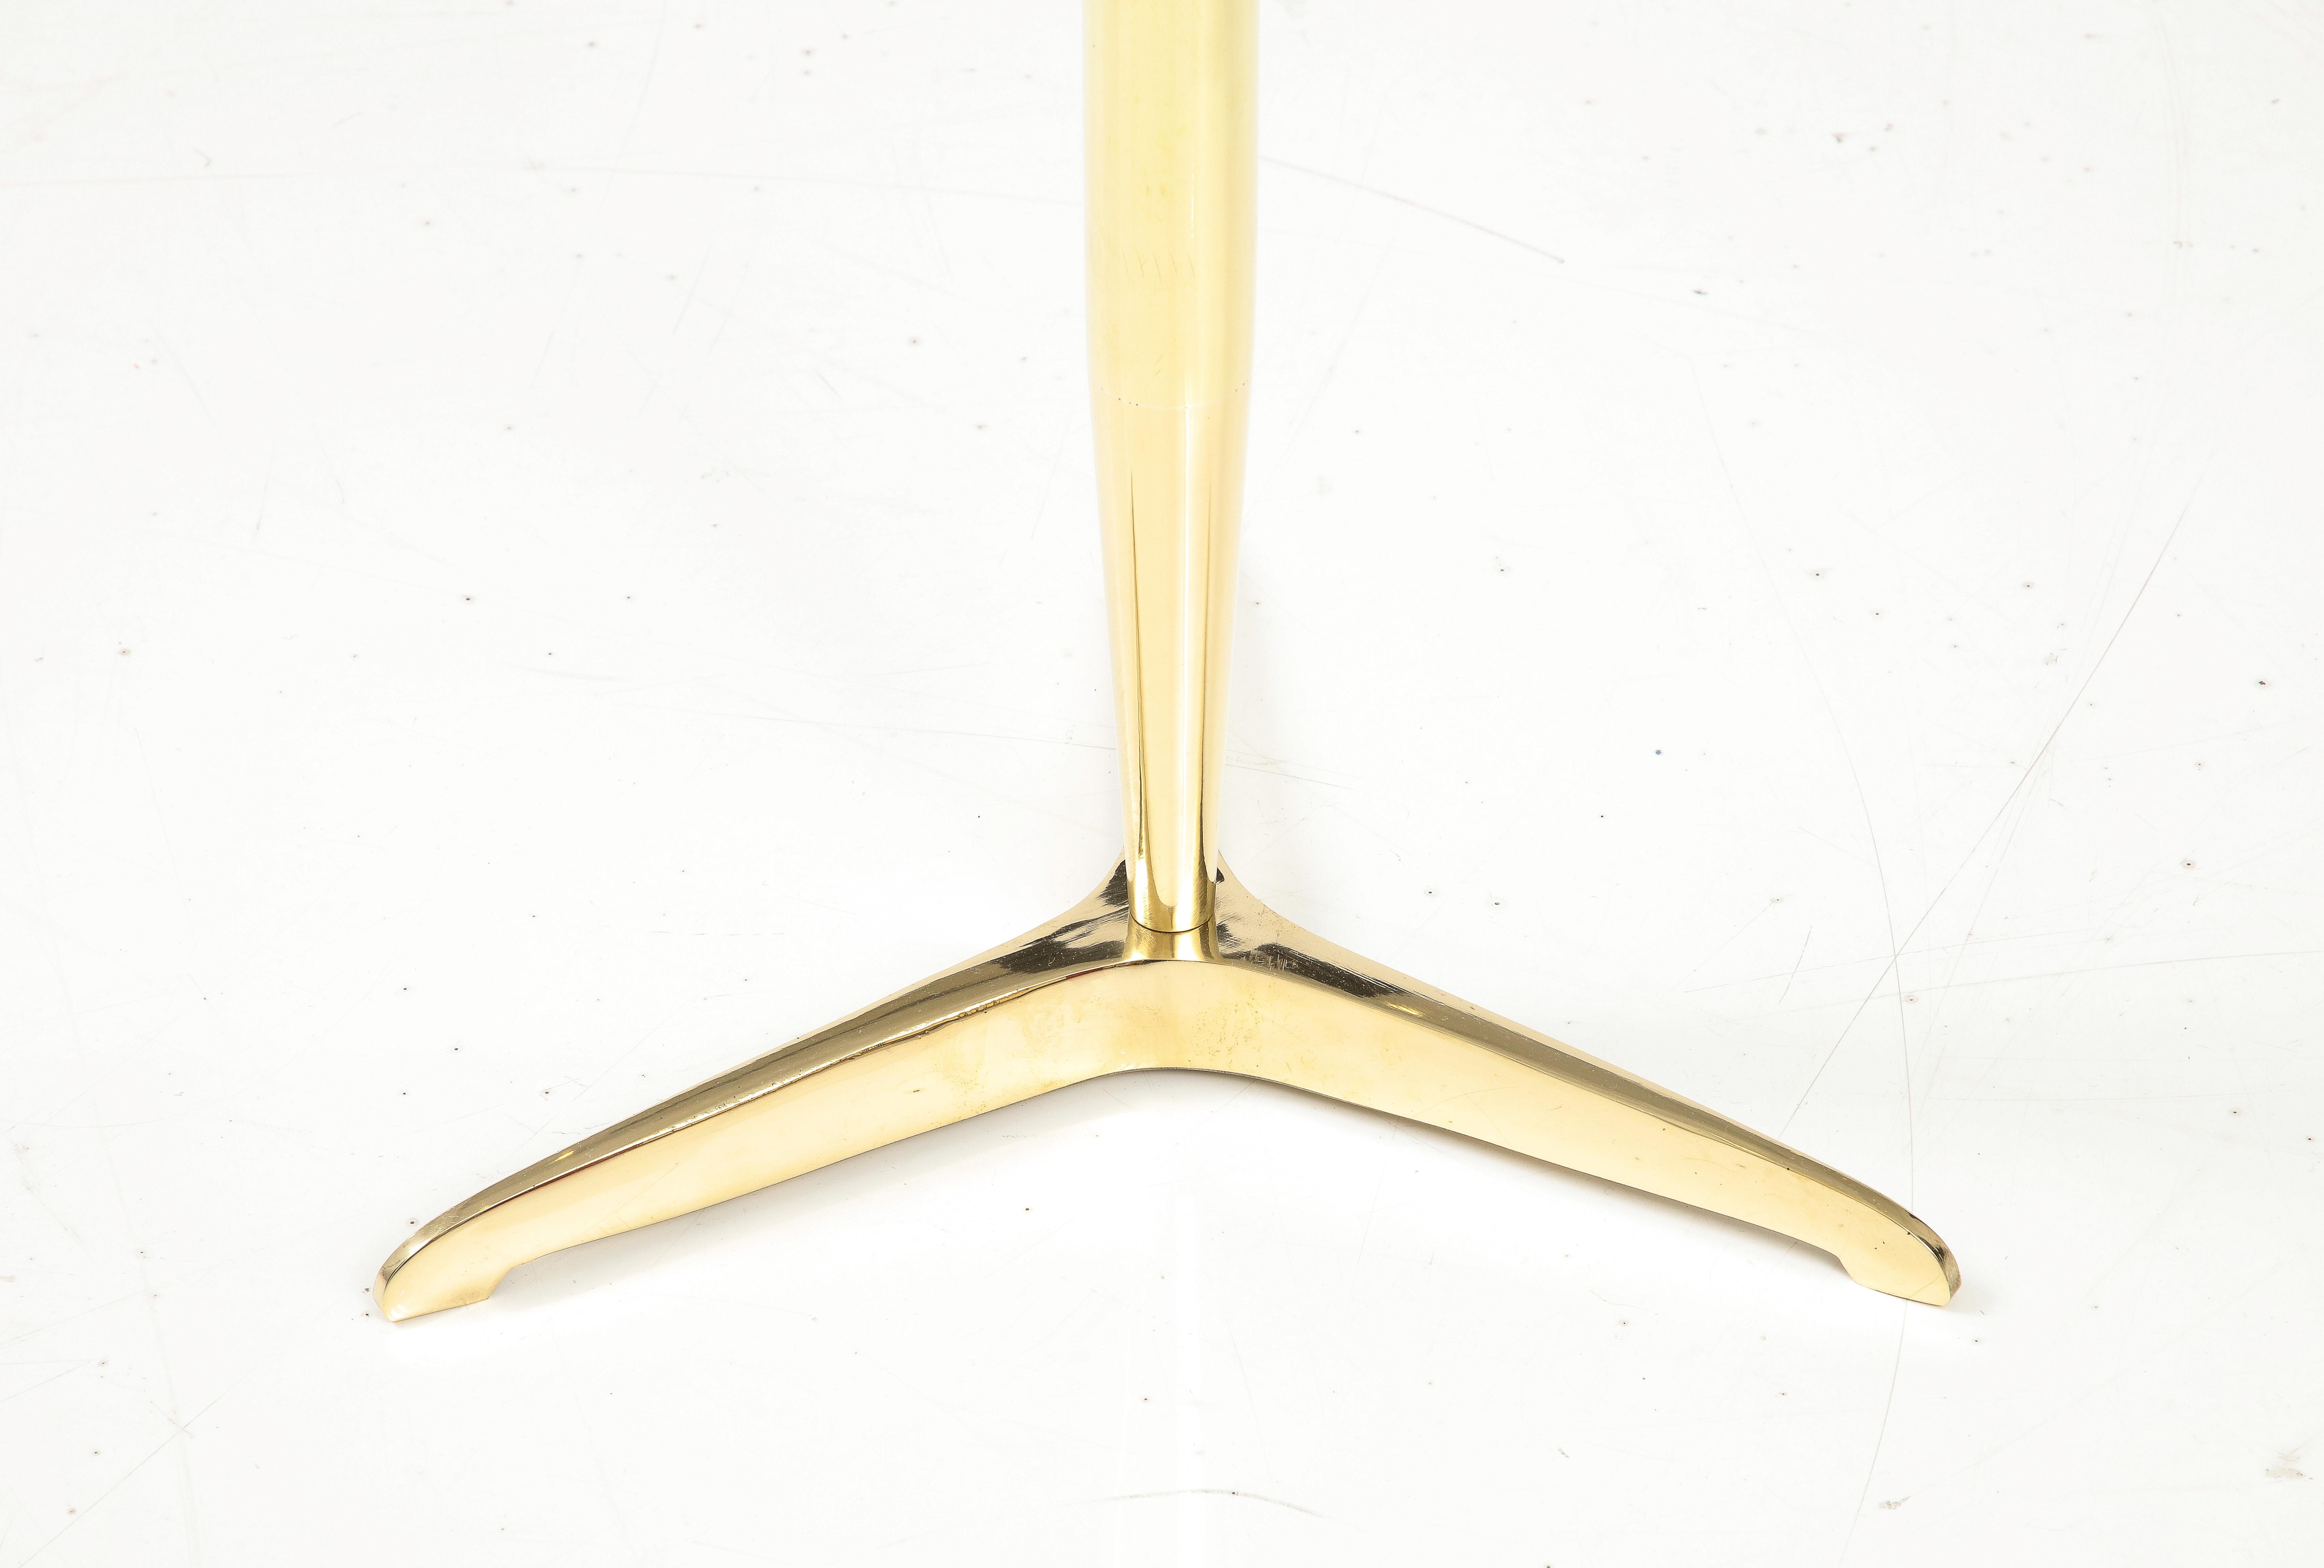 Occasional Martini drinks side table in thick beveled glass with patinated brass tripod base and small brass handle detail.  Handmade in Italy, 2022. This bespoke modern side or martini table is handcrafted with thick lens cut polished beveled glass